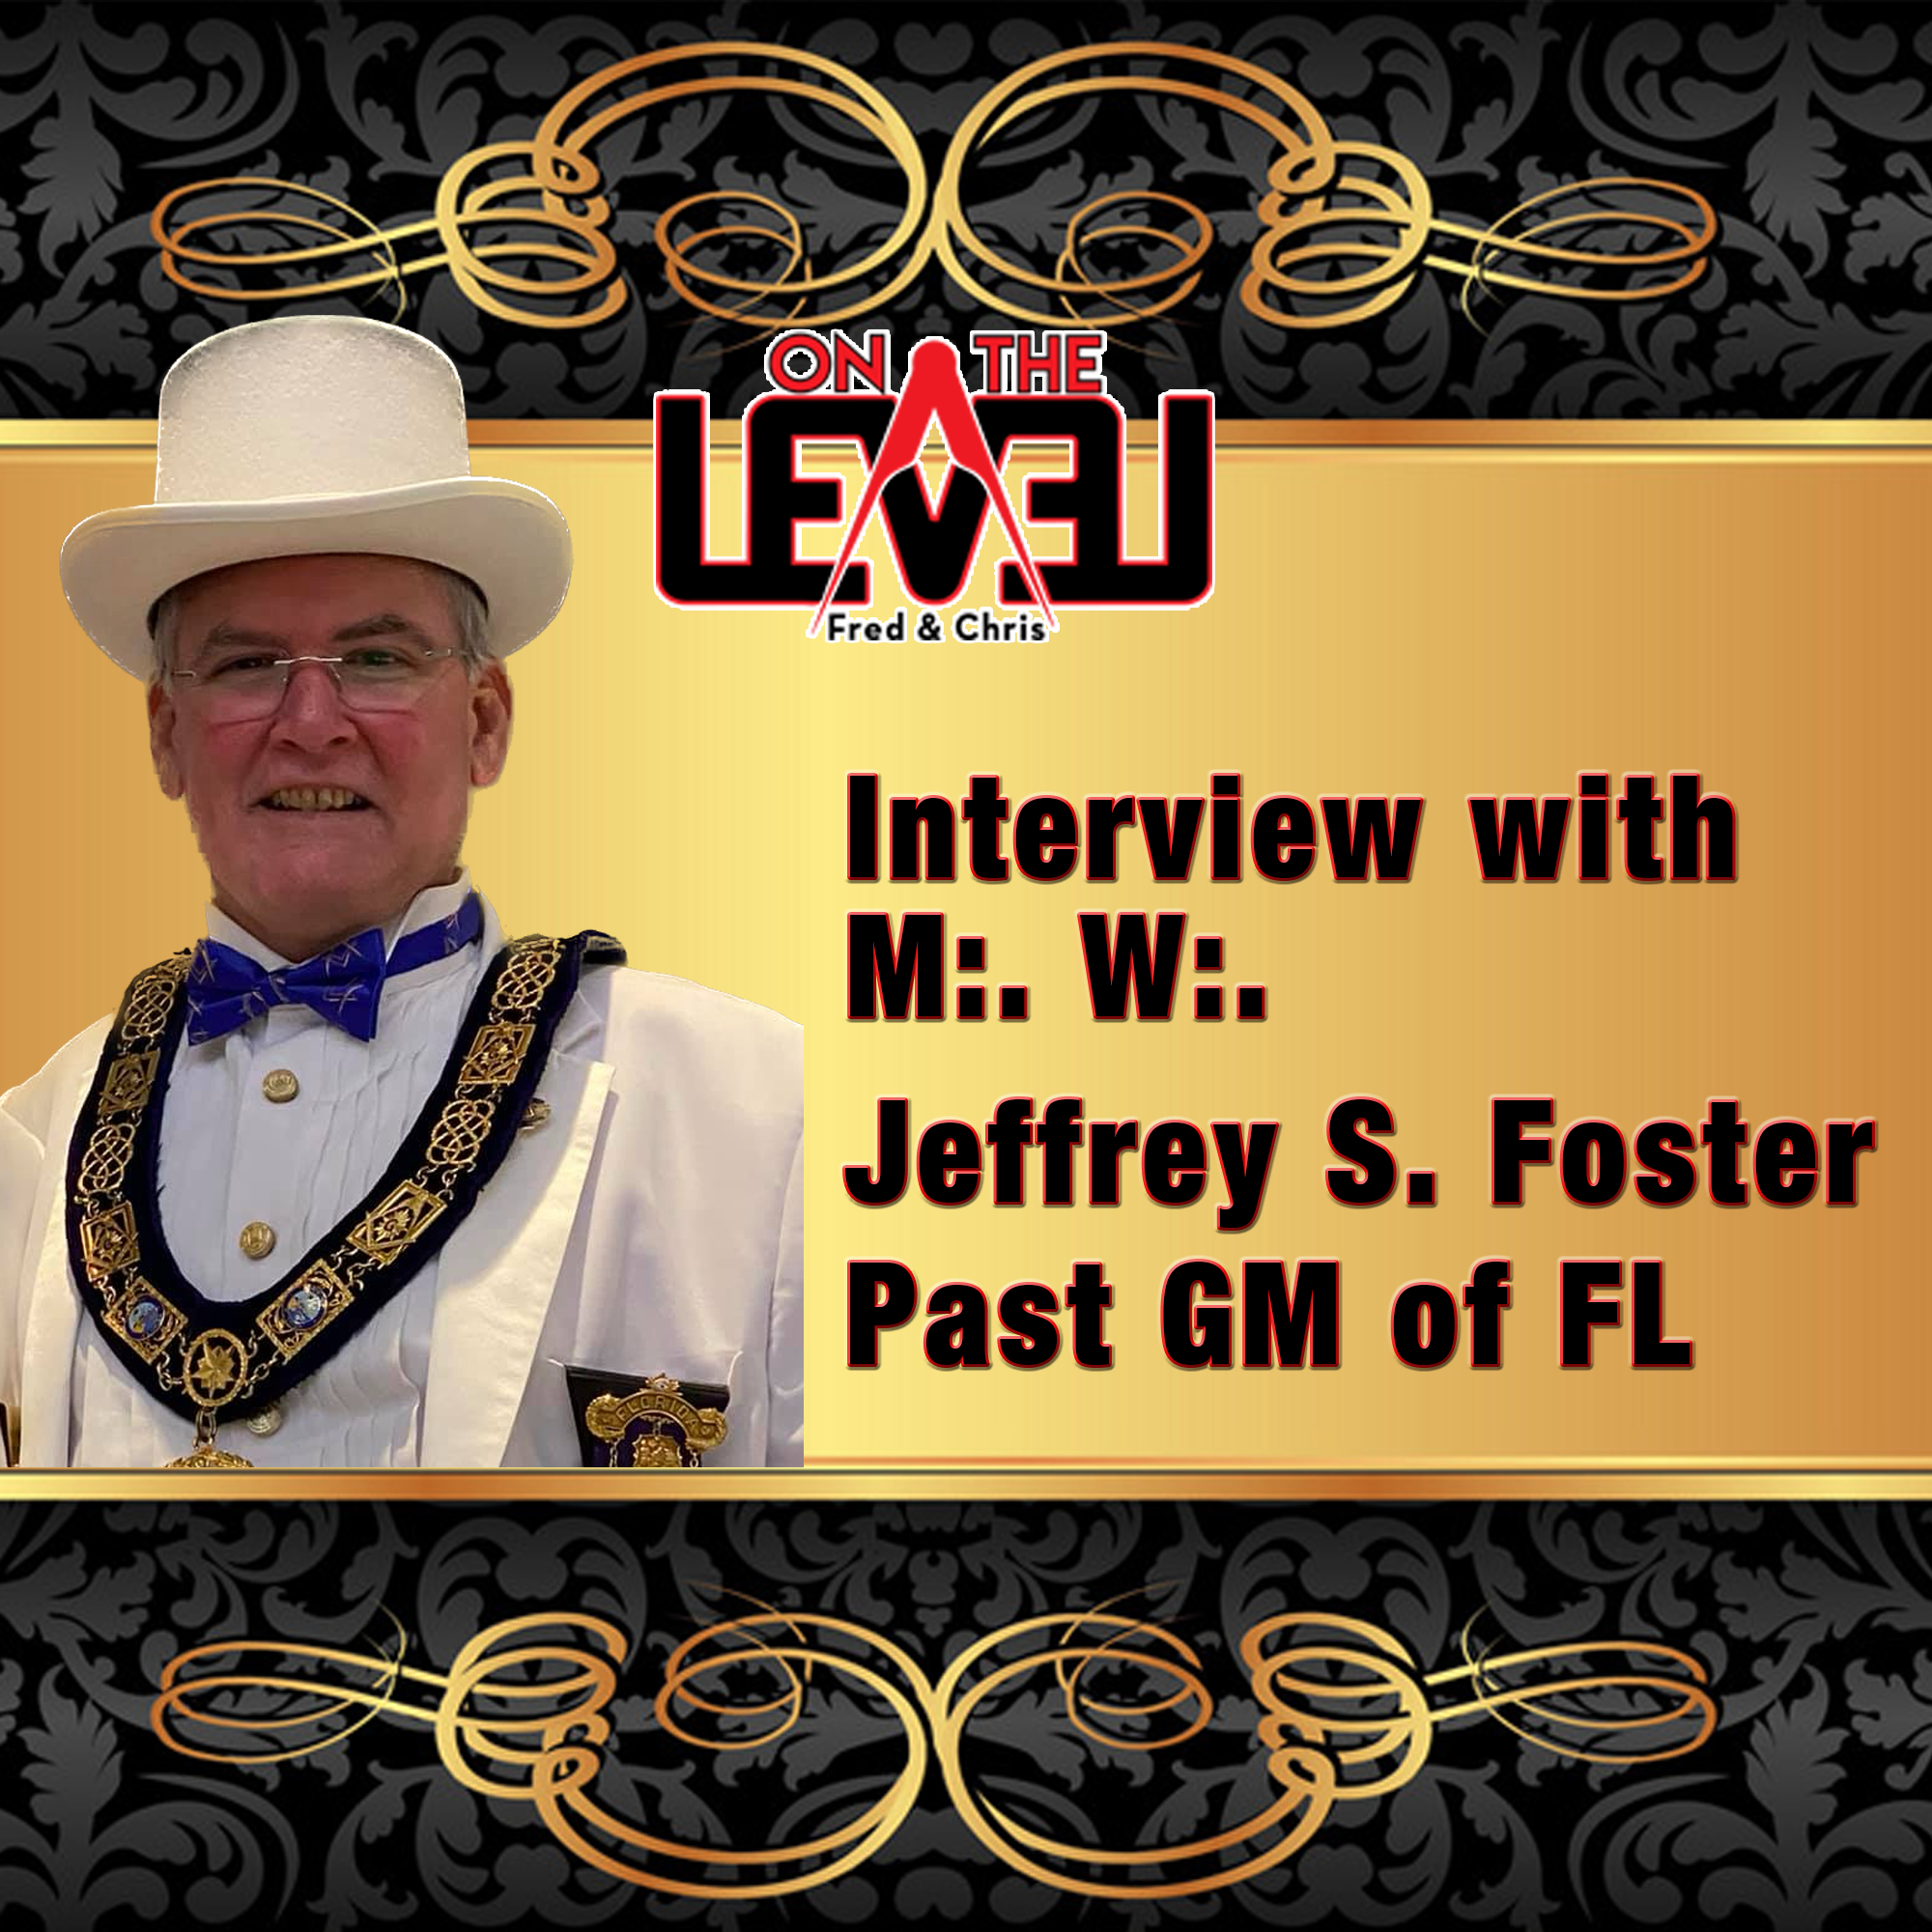 Interview with M:. W:. Jefferey Foster, Past Grand Master of Masons in FL